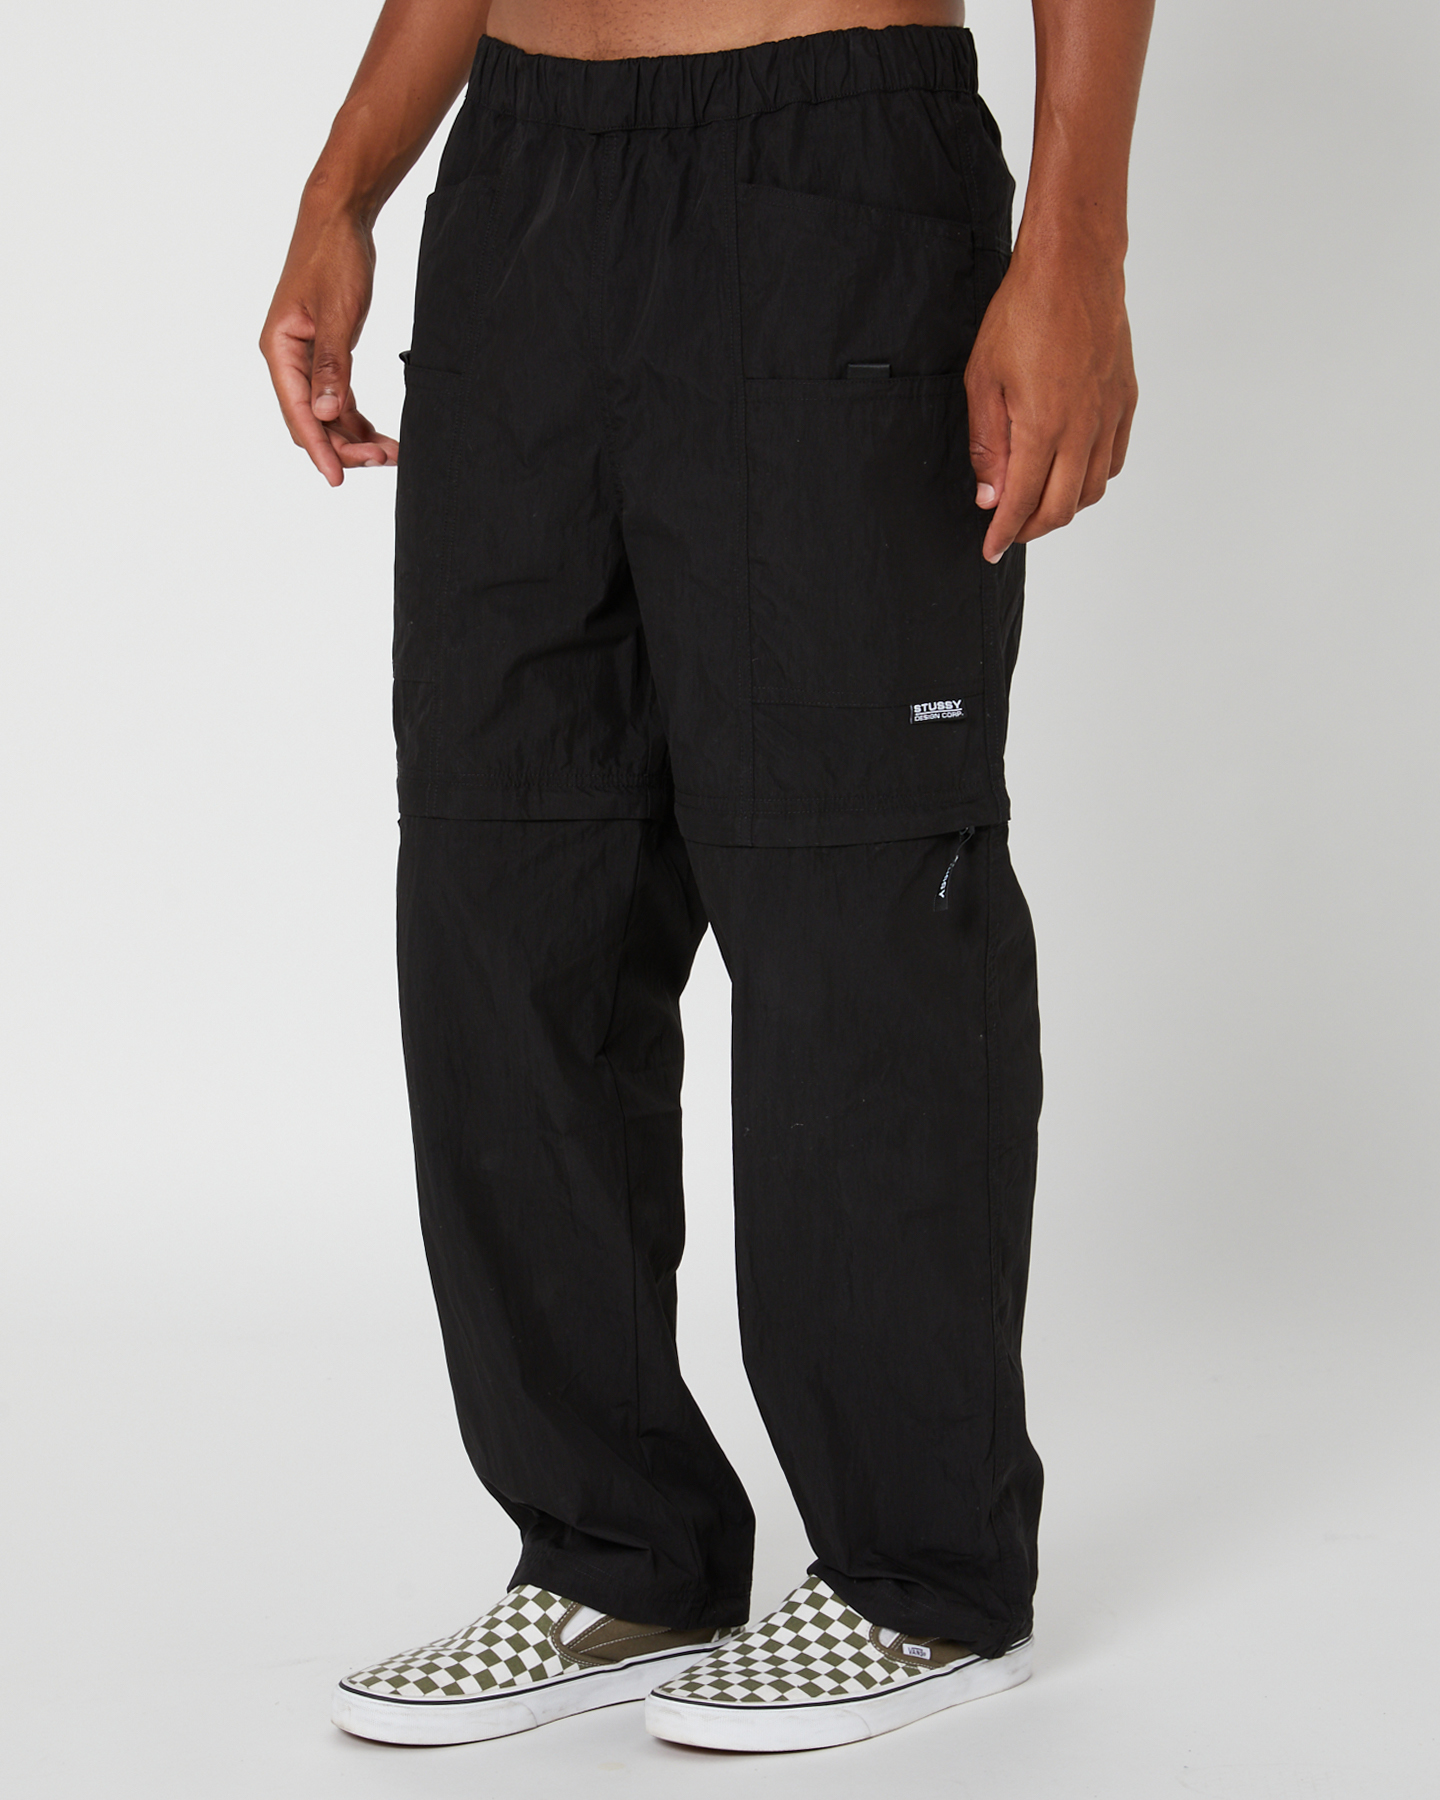 Stussy Nyco Convertible Pant - Black | SurfStitch